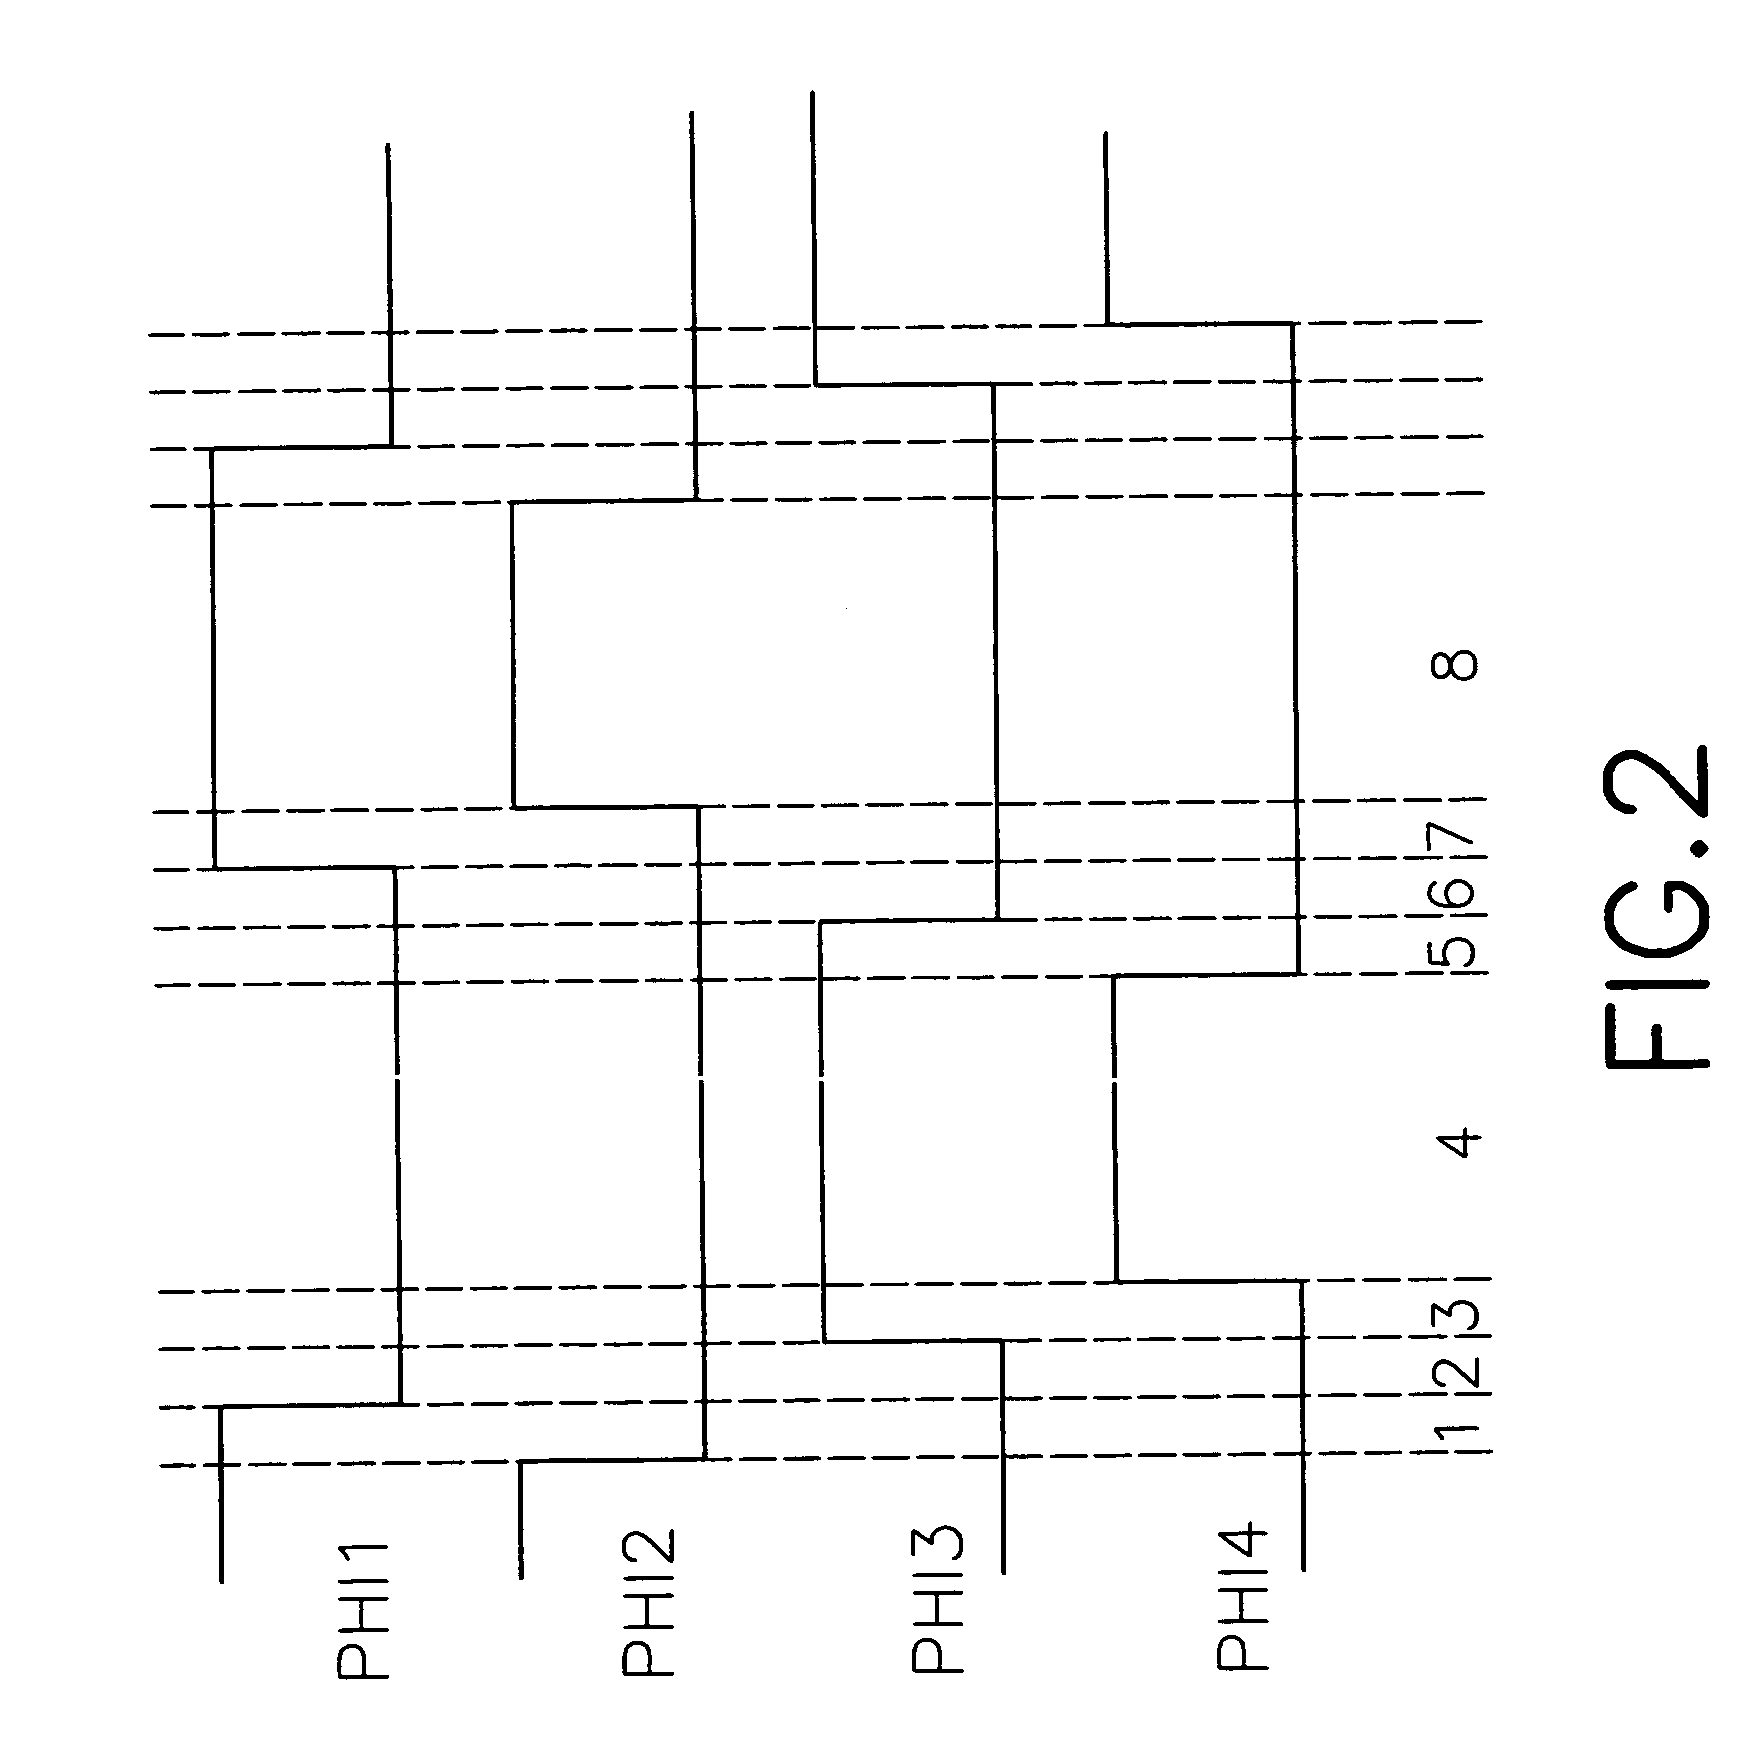 Four-phase charge pump circuit with reduced body effect